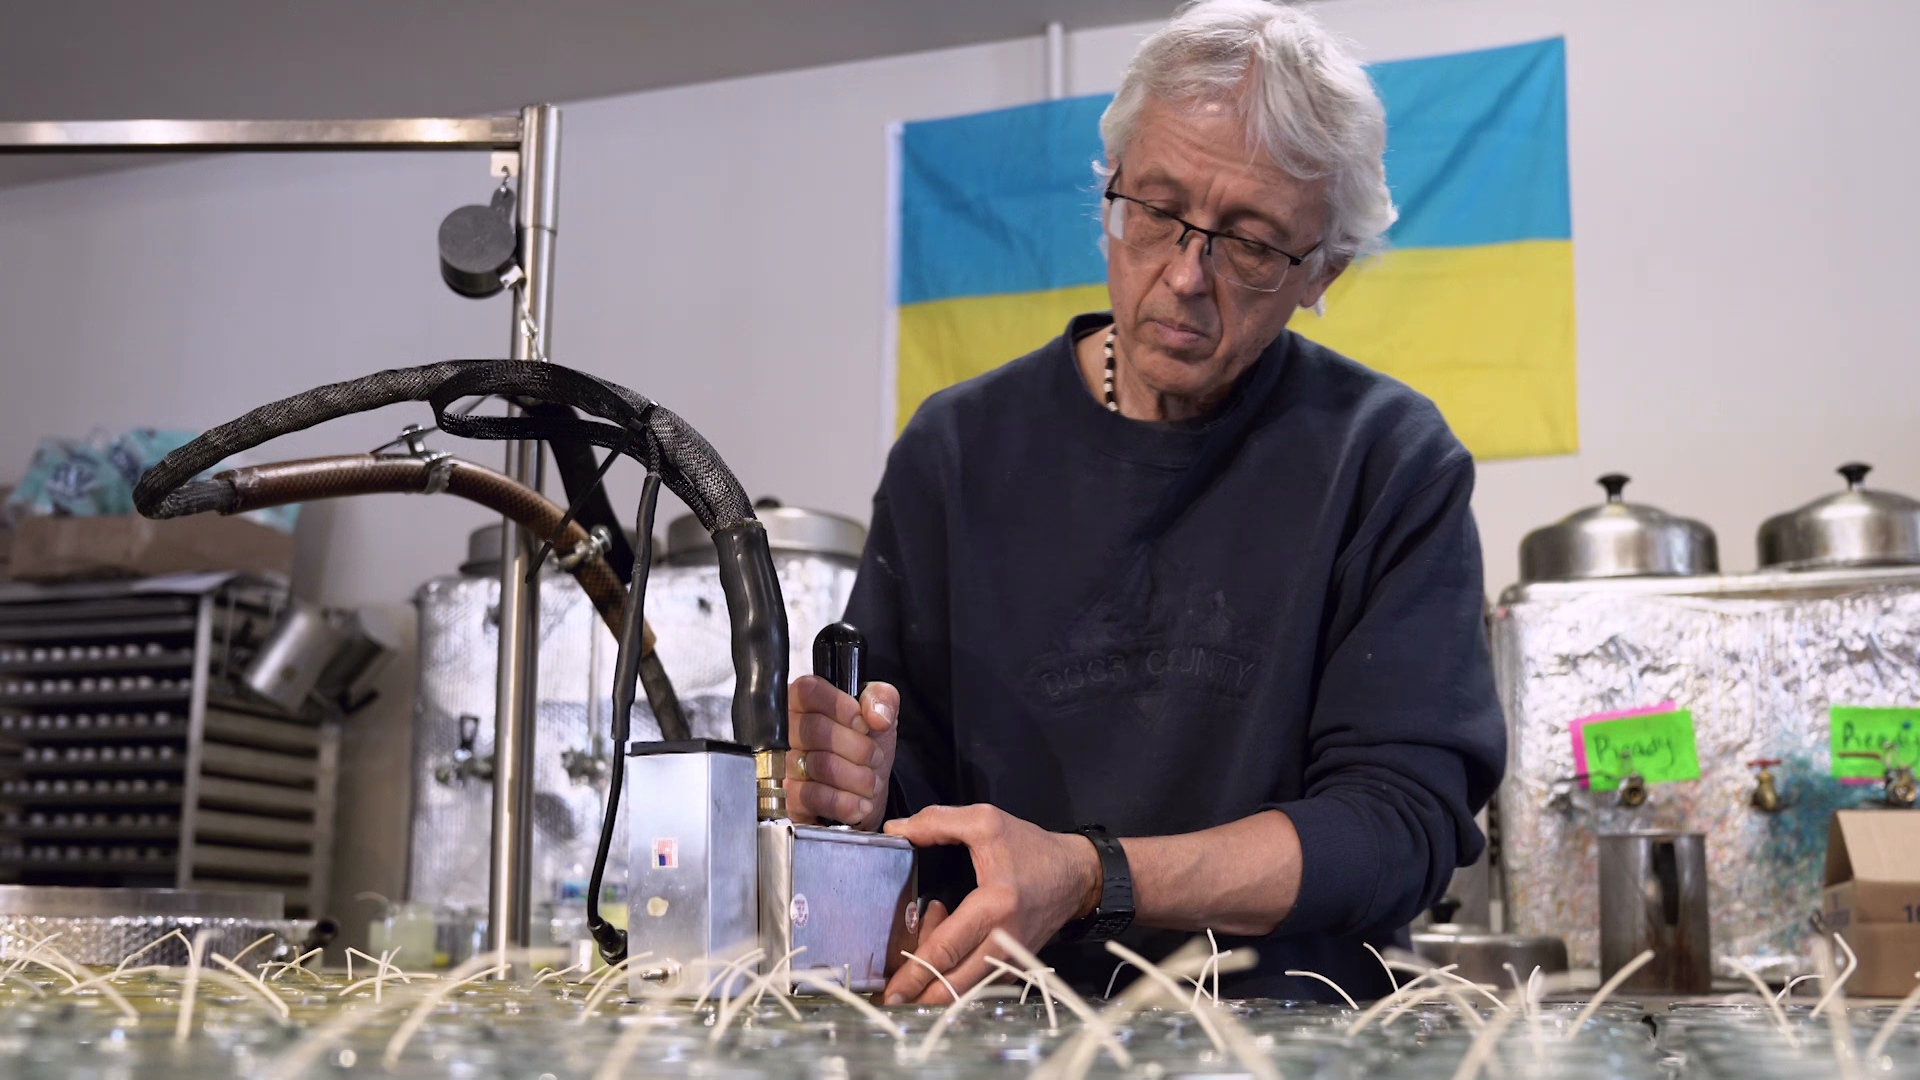 A man manufactures candles at a candle shop